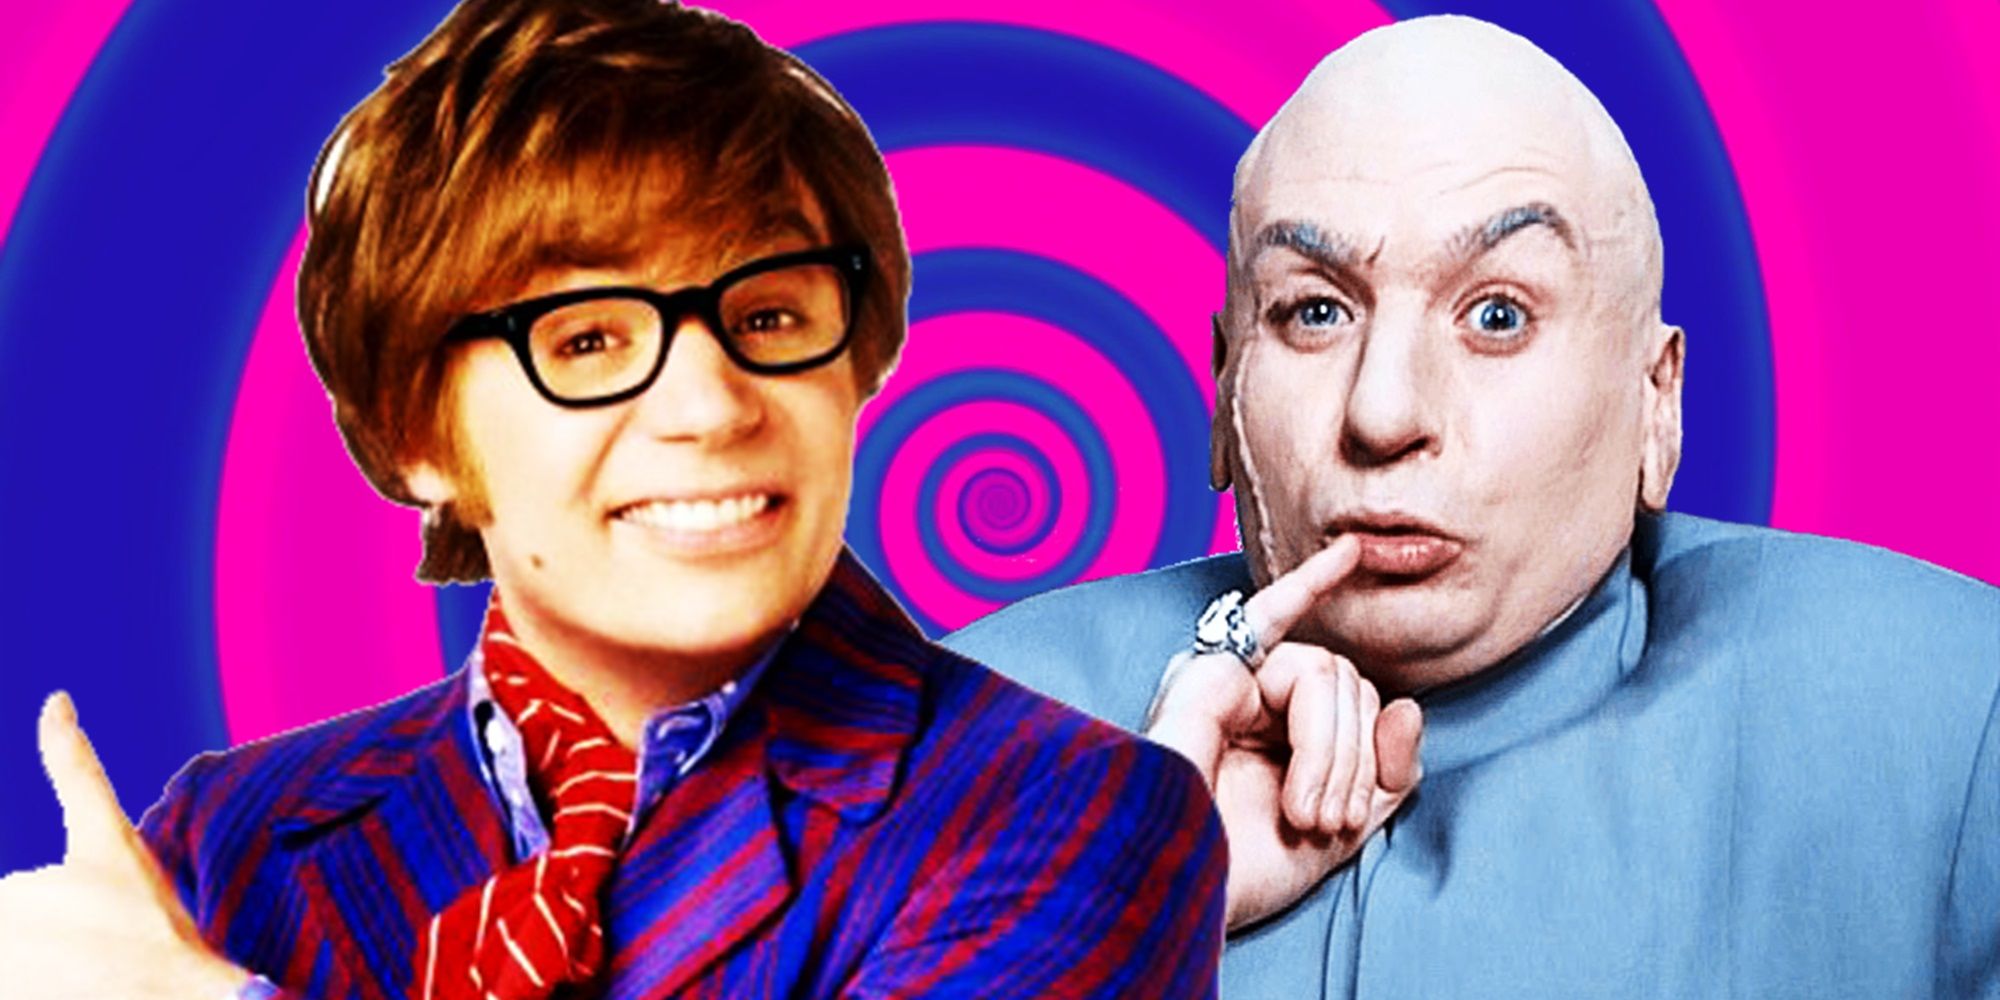 Collage of Austin Powers and Dr Evil against a psychedelic backdrop